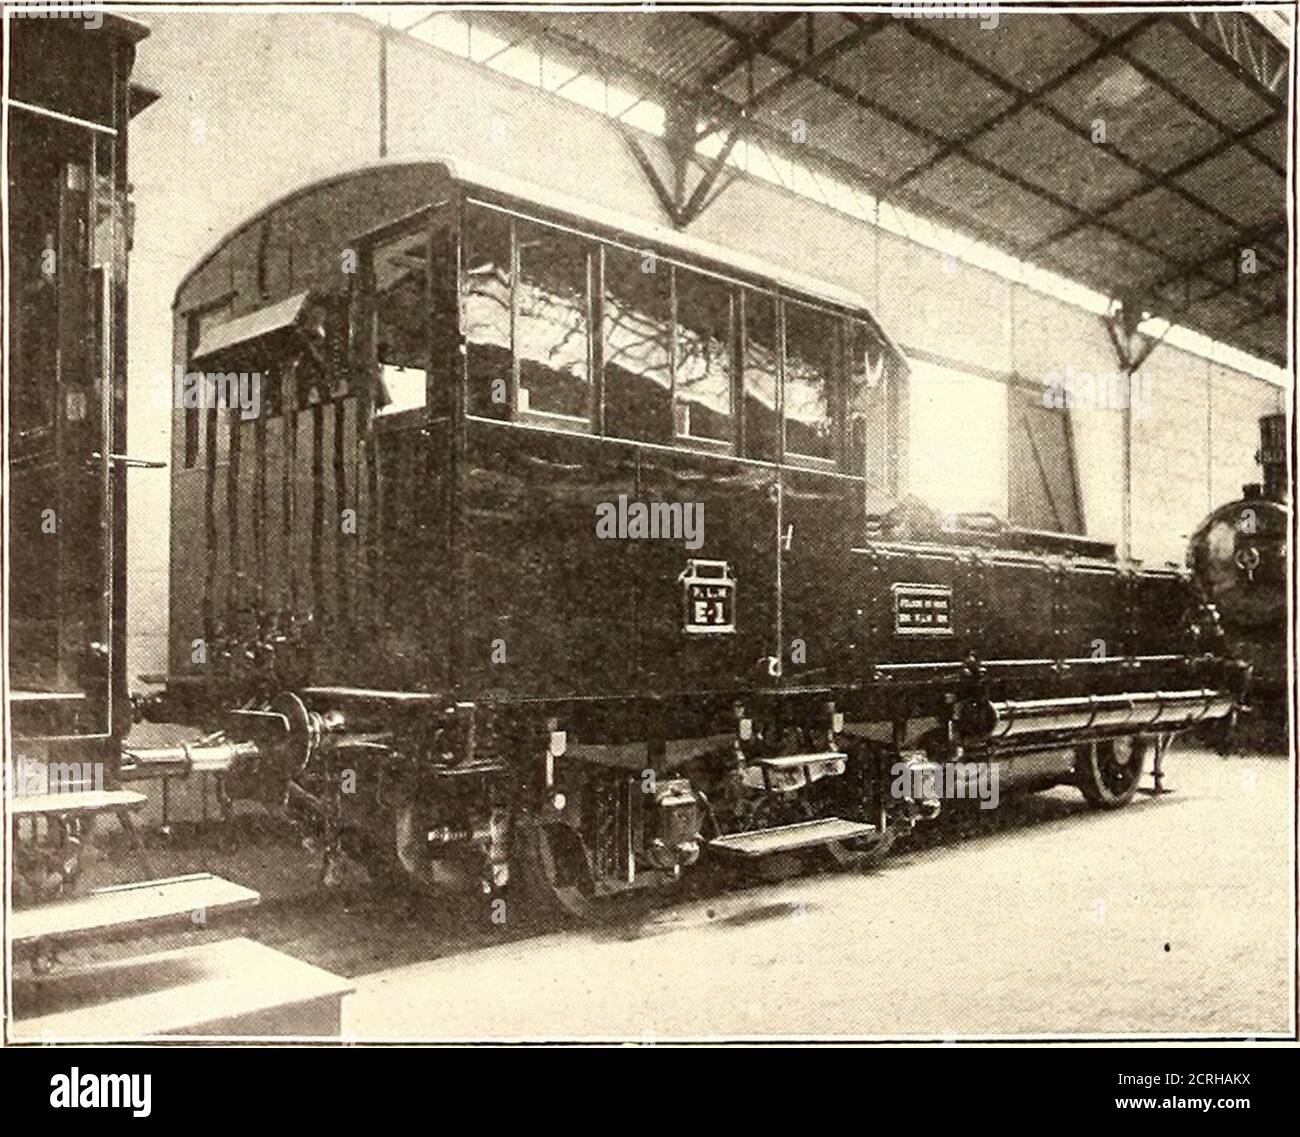 . The Street railway journal . ELECTRIC LOCOMOTIVE, PARIS, LYONS, MEDITERRANEAN R. R. herewith. A liberal exhibitor in the French class is theCompanie Generale des Omnibus de Paris, which exhibitsa street railway car operated by accumulators, one of thesteam type, one with an oil engine, and one of the com-pressed-air type. Some of these have been shown already, TRUCK OF GANZ ELECTRIC LOCOMOTIVE, VINCENNES two General Electric motors of 25 hp each. It affordsthirty-five seats, and the back rails of all but the endbenches are reversible. The Ringhoffer car seats twenty-four passengers, and has Stock Photo